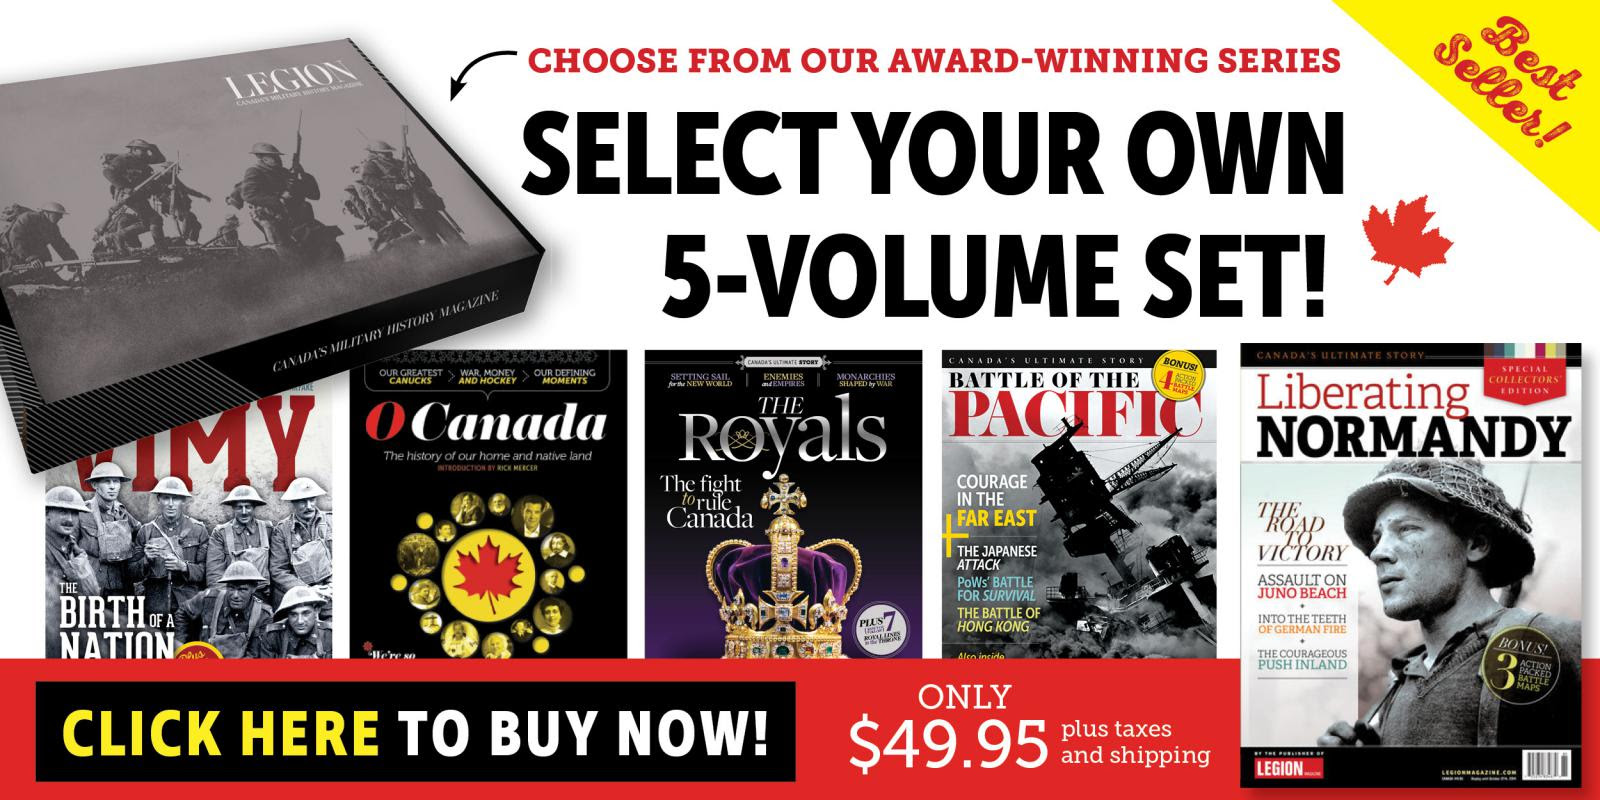 Select-Your-Own 5-Volume Set - Our Best Seller!